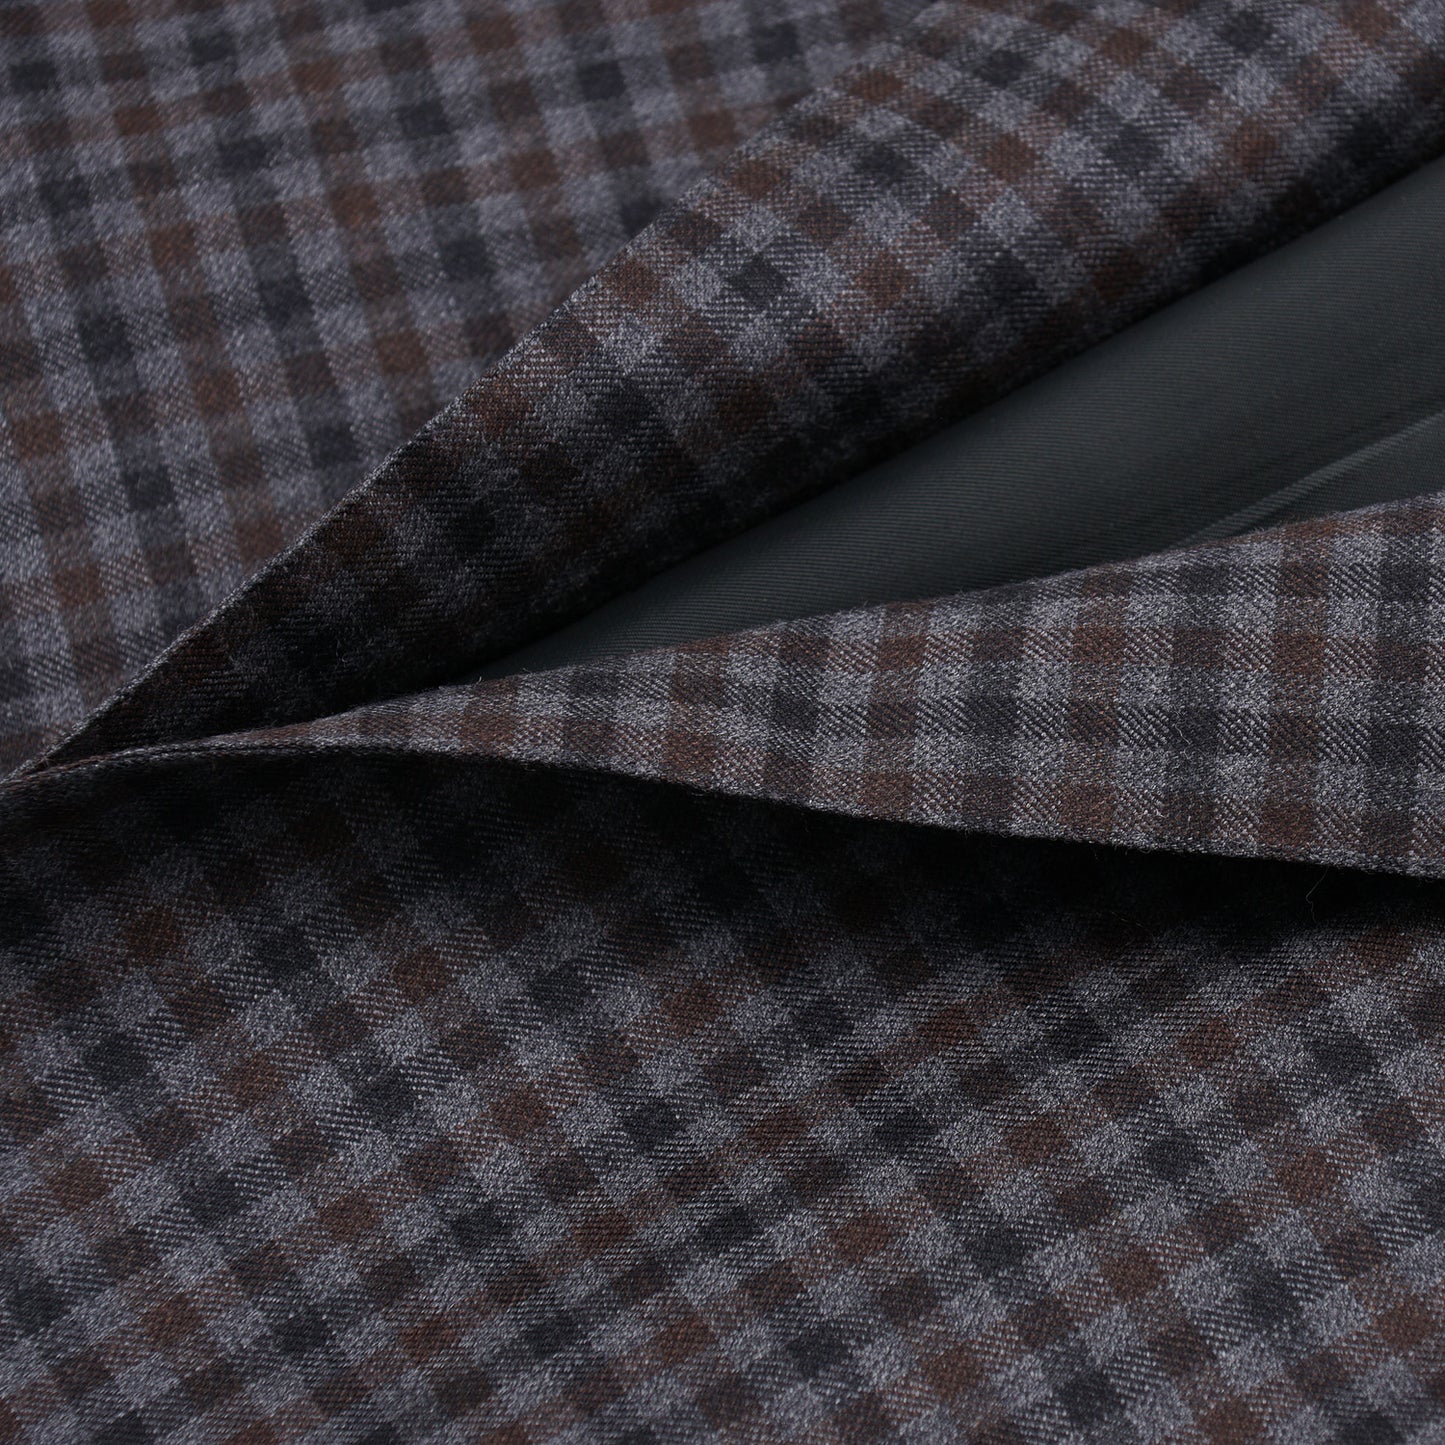 Isaia Check Wool-Cashmere Sport Coat - Top Shelf Apparel